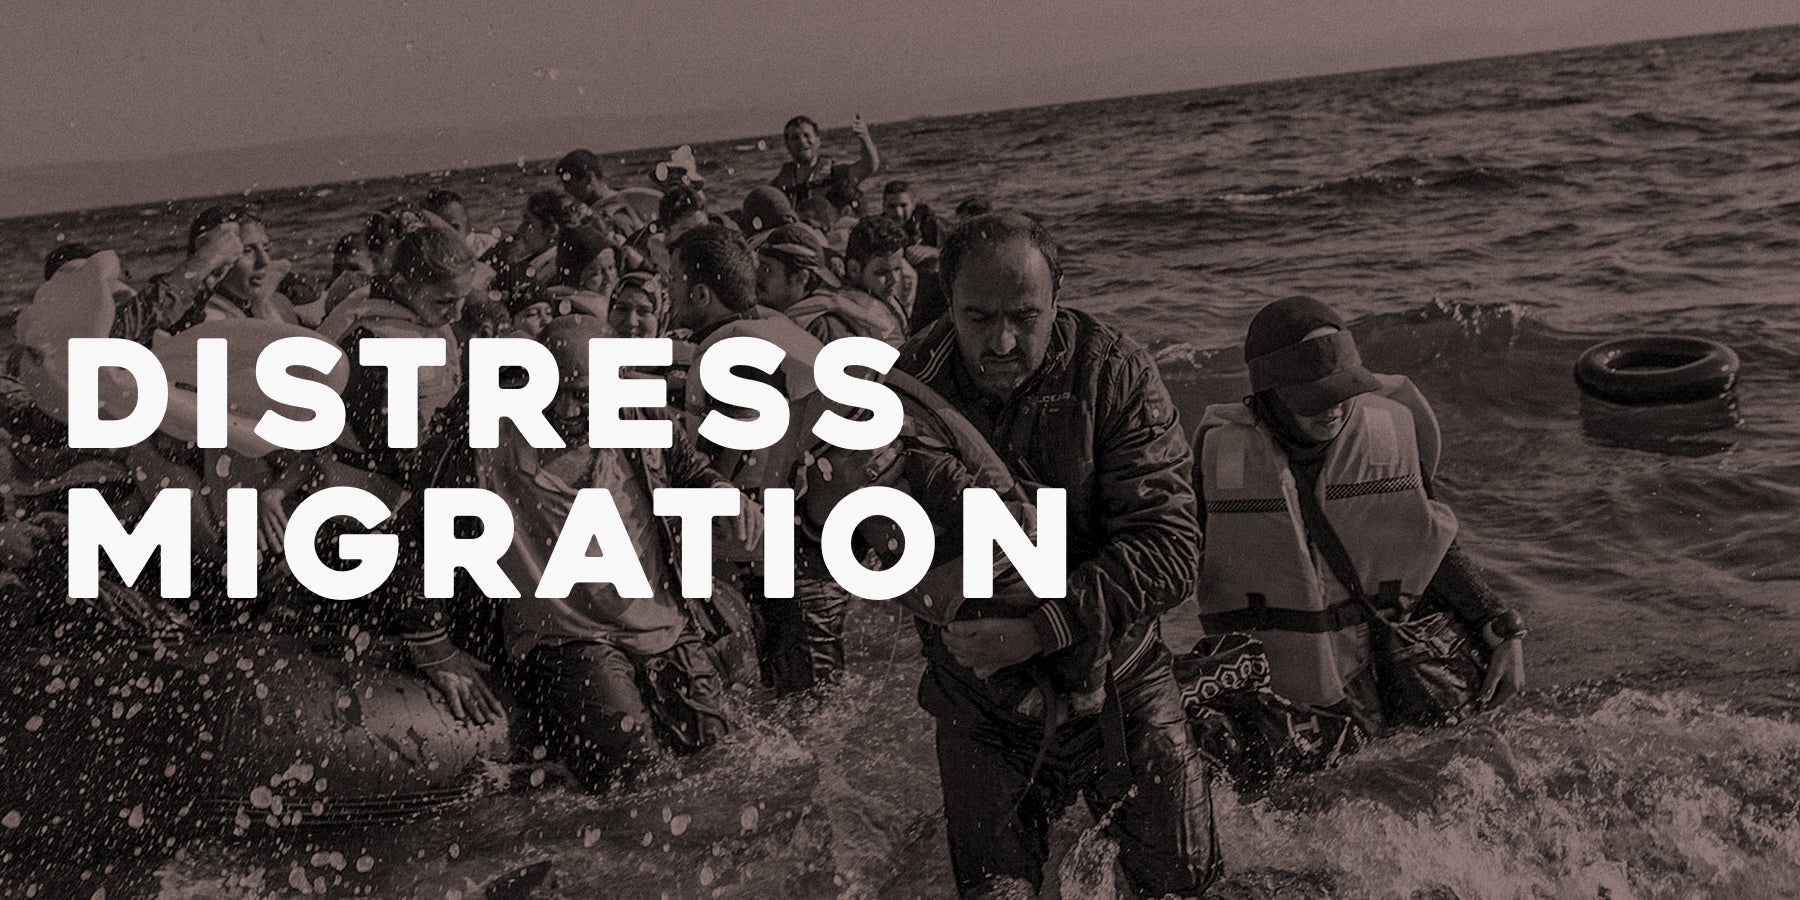 The text "Distress Migration" against a black and white image of migrants coming out of the sea in life vests.